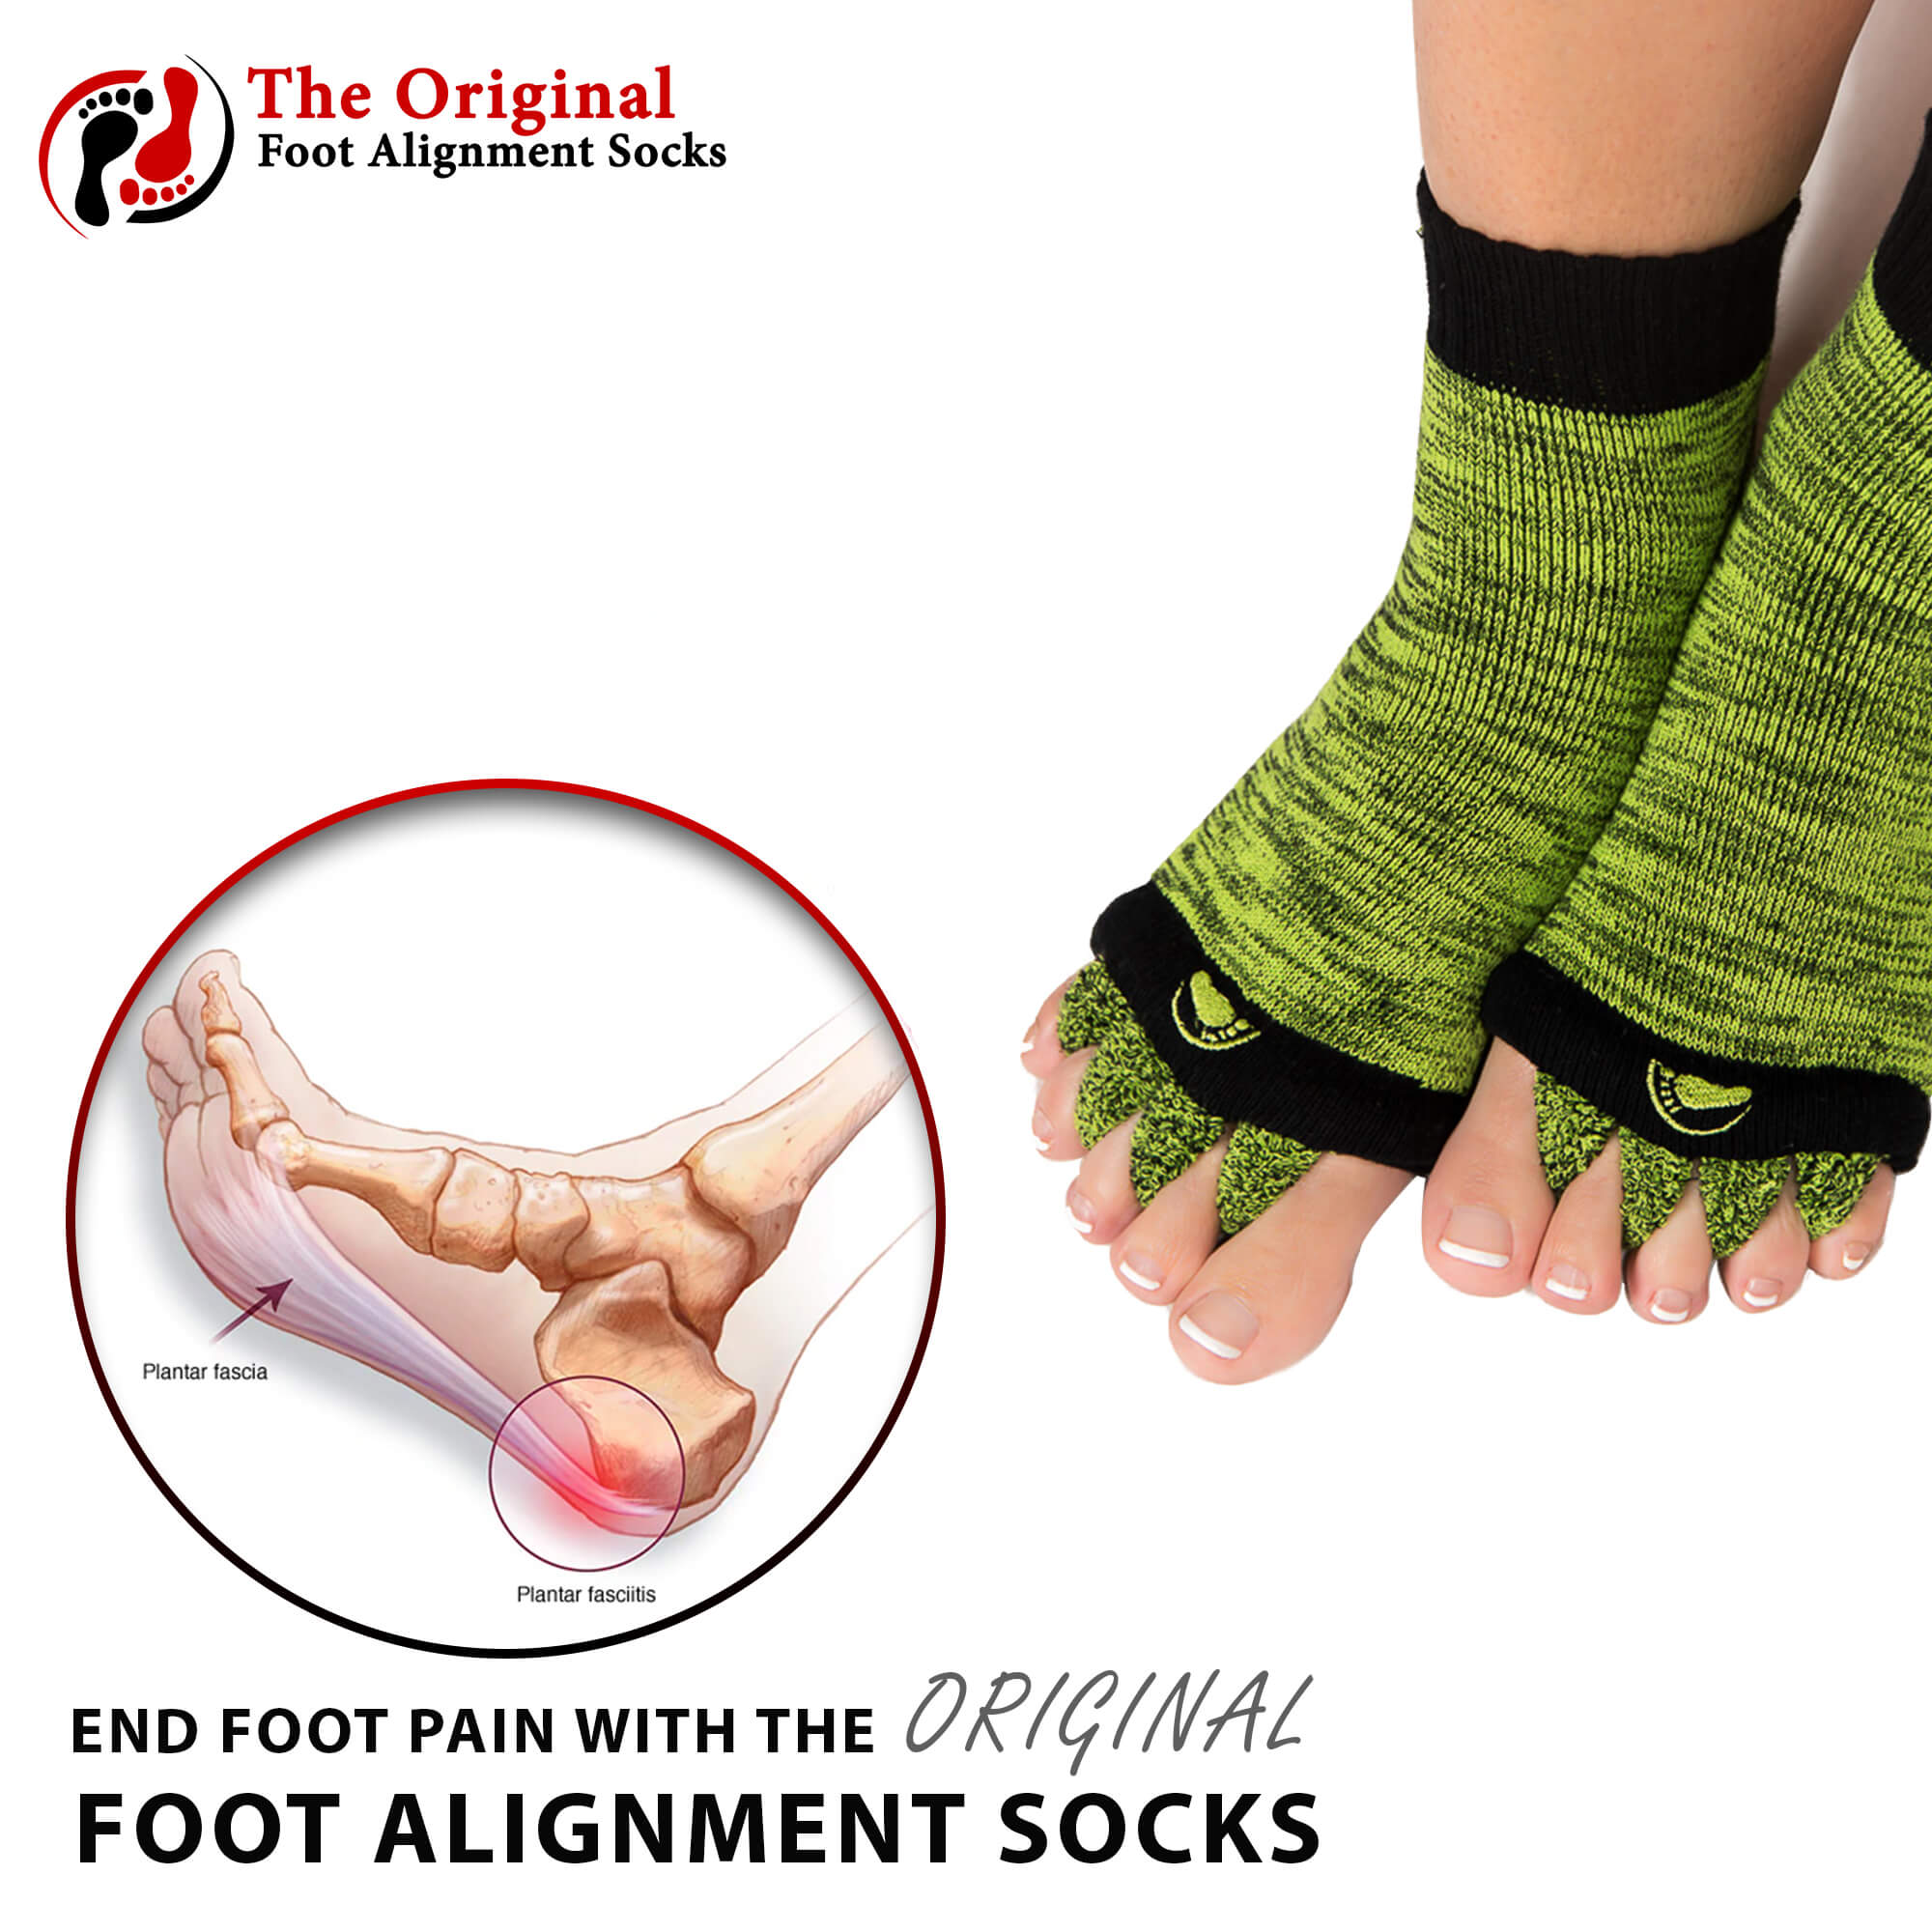 Sore feet and foot pain find relief with Green Foot Alignment